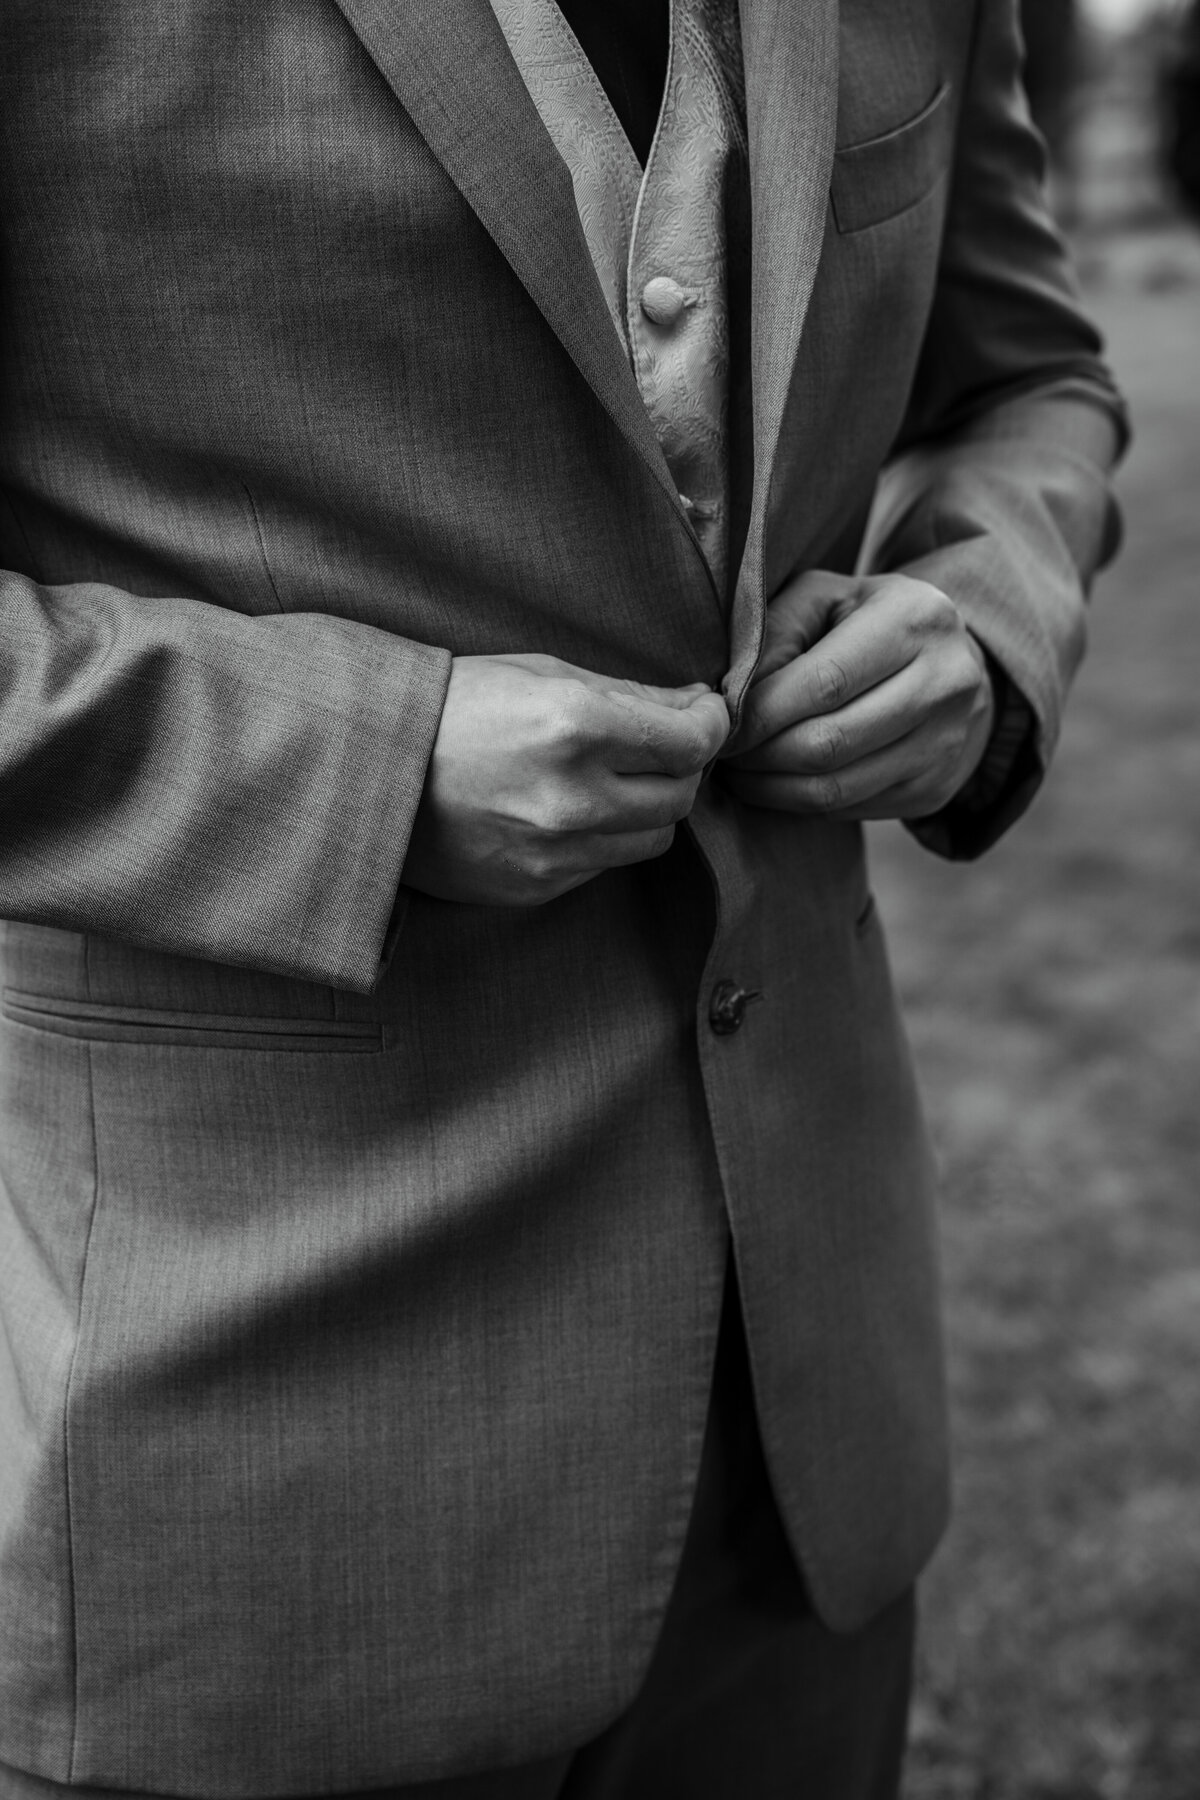 Groom buttoning suit jacket